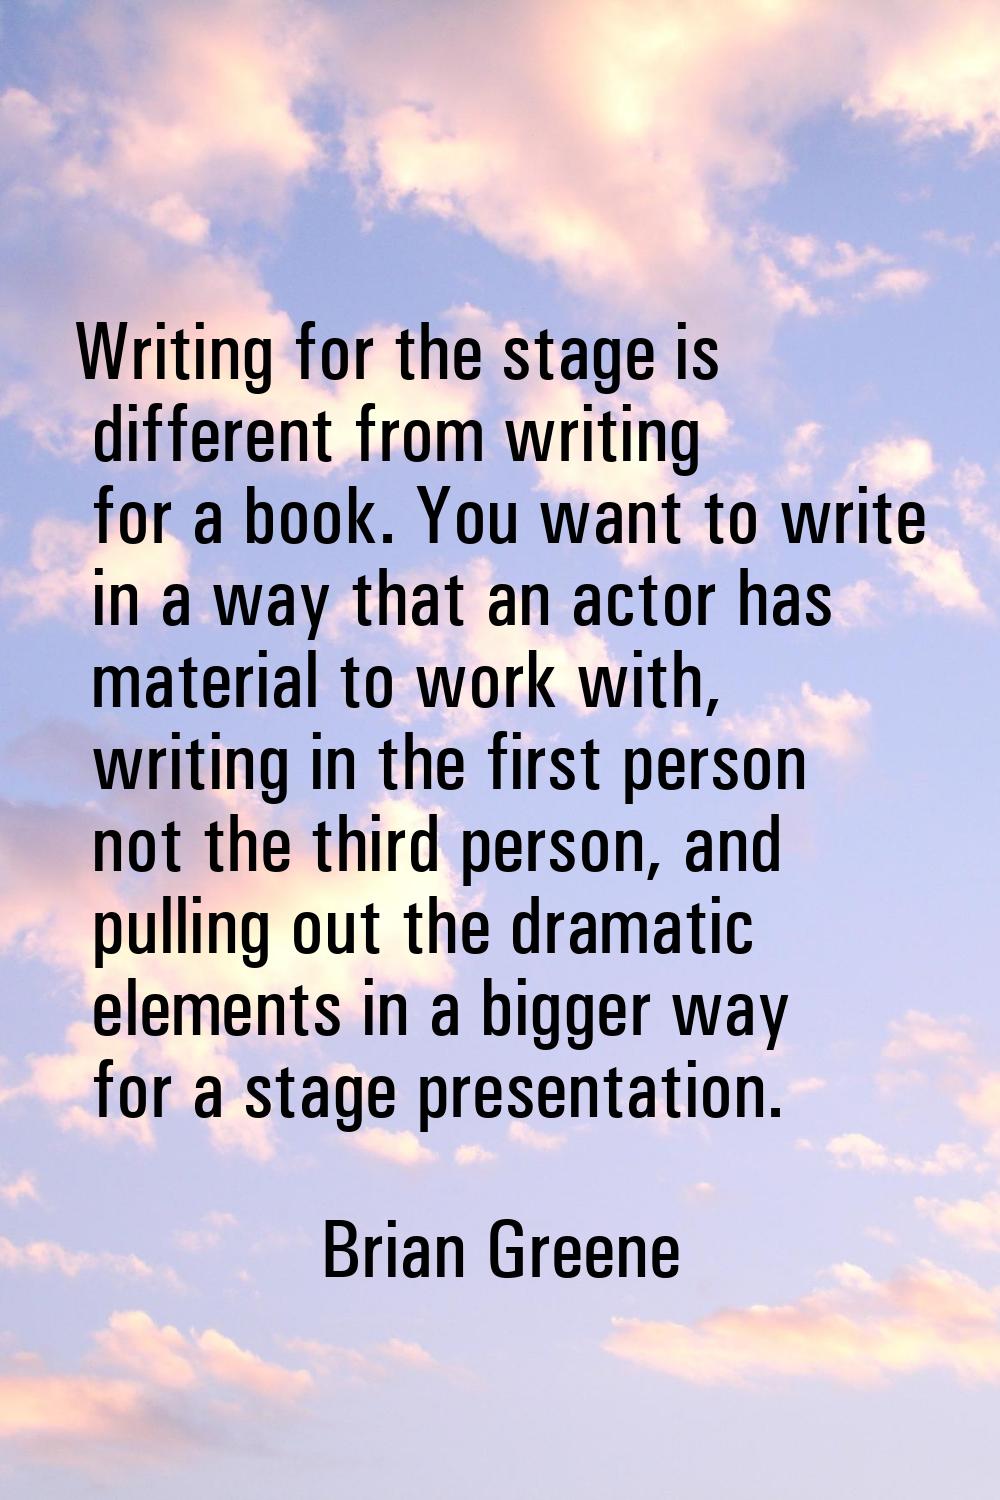 Writing for the stage is different from writing for a book. You want to write in a way that an acto